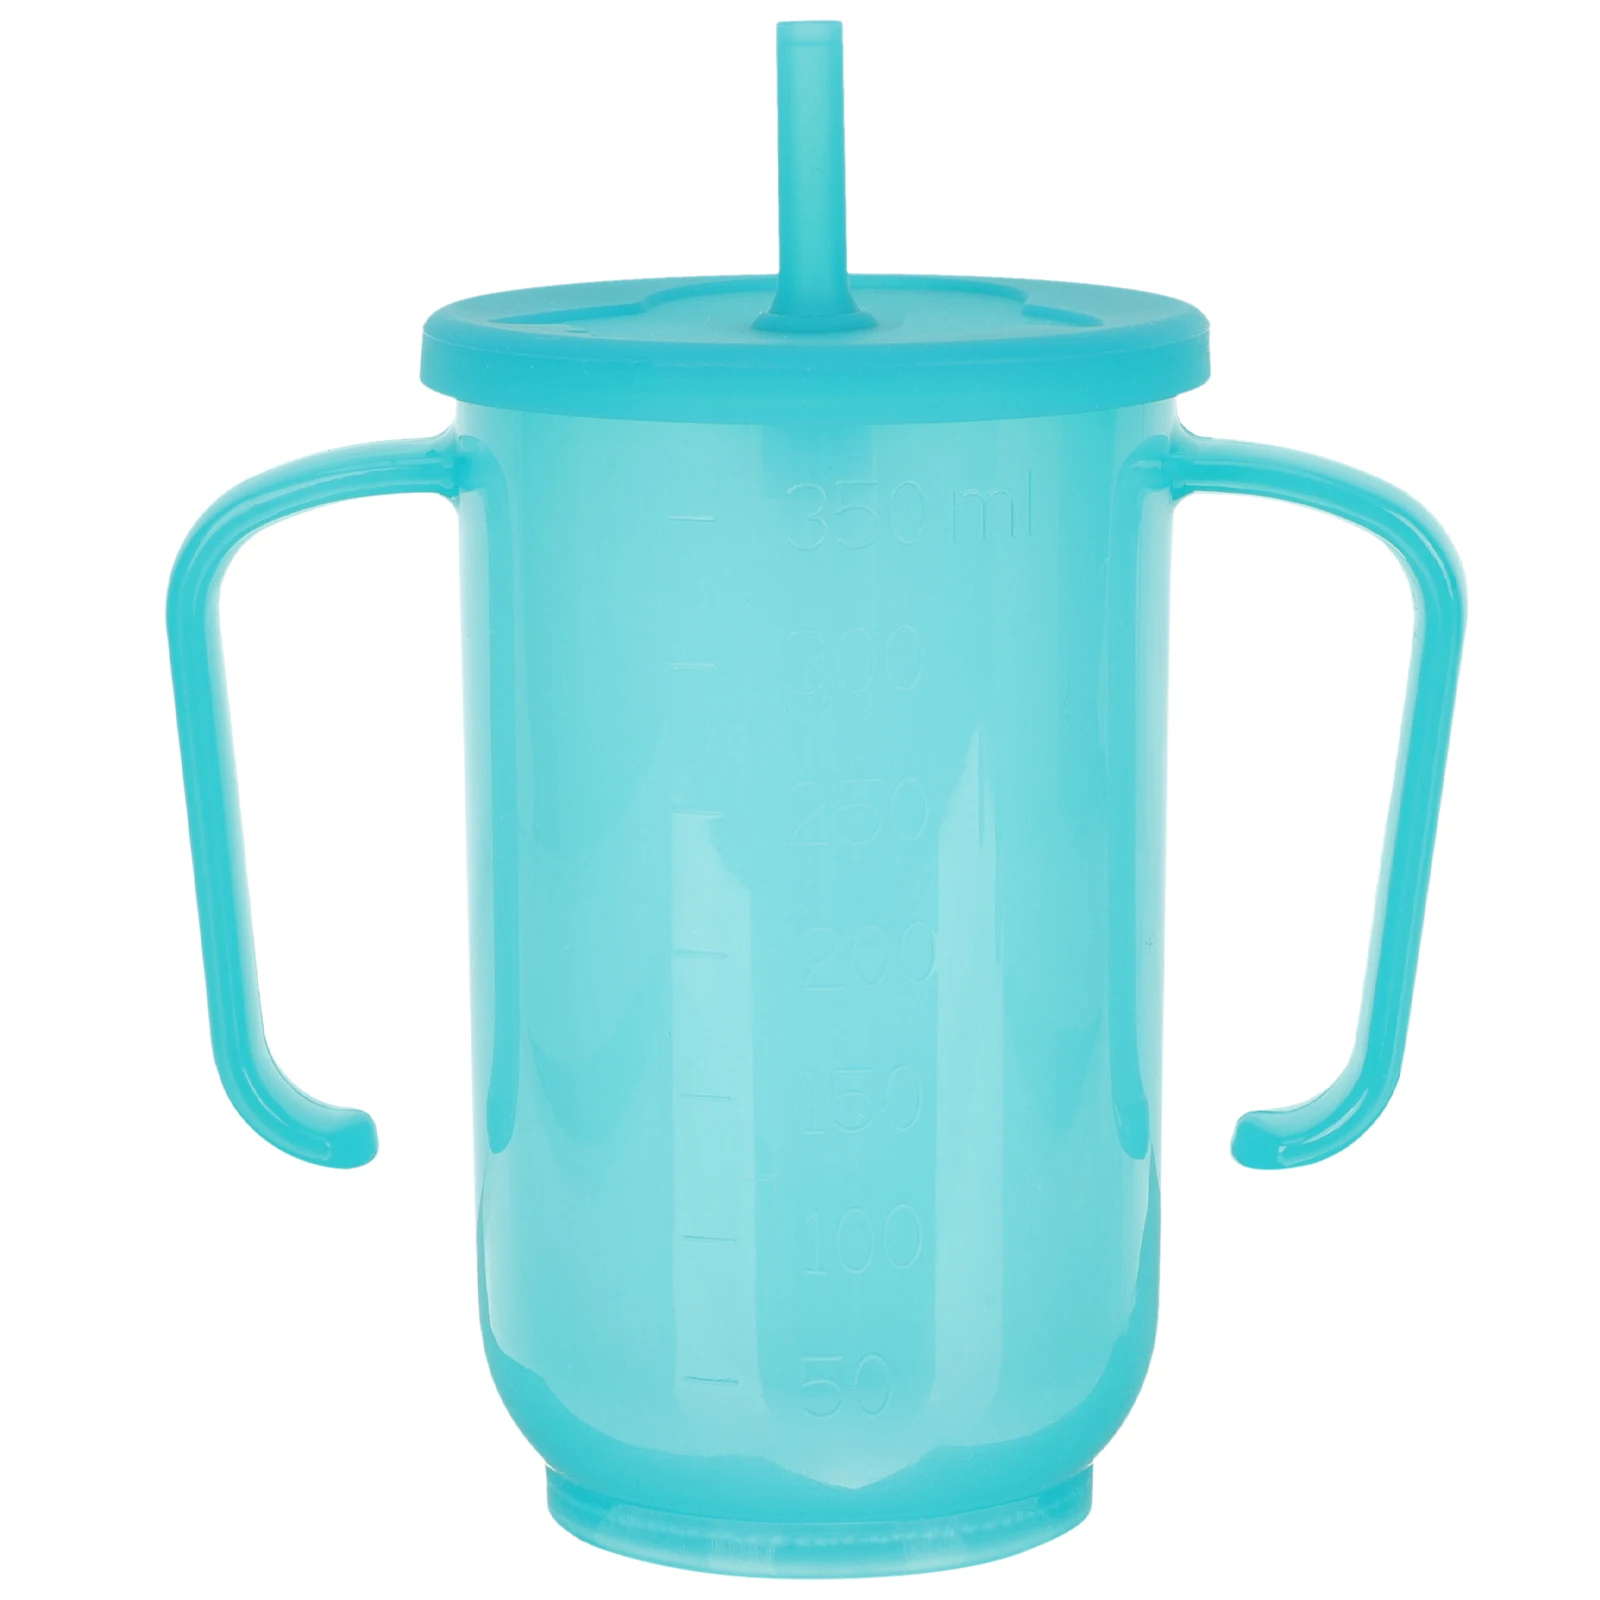 

Cup Cups Feeding Sippy Elderly Drinking Spill Adult Convalescent Straw Patient Mug Proof Adults Liquid Perle French Disabled